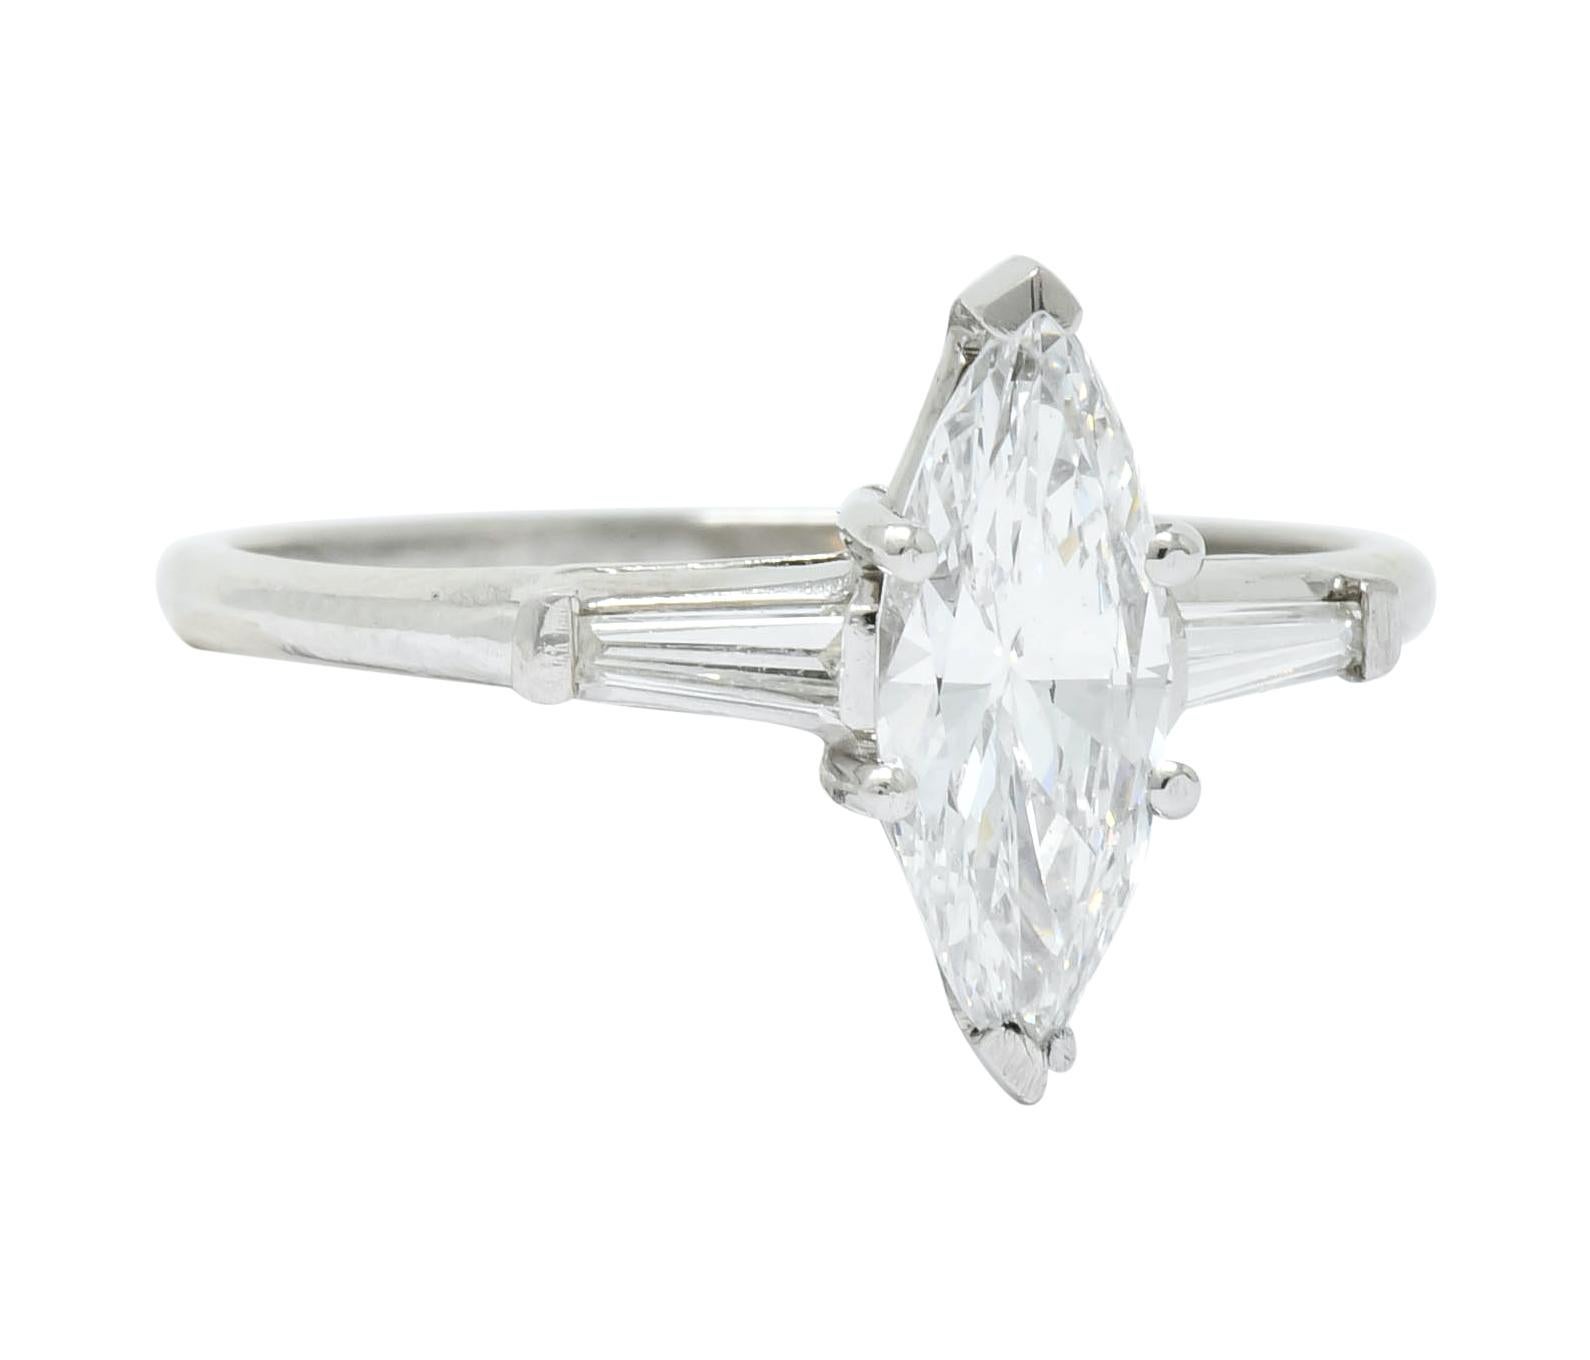 Centering a marquise cut diamond weighing 0.87 carat, E color and VS2 clarity, basket set with V tip prongs

Flanked by bar set tapered baguettes weighing approximately 0.16 carat total, E/F color and VS clarity

With maker's mark for J.E. Caldwell